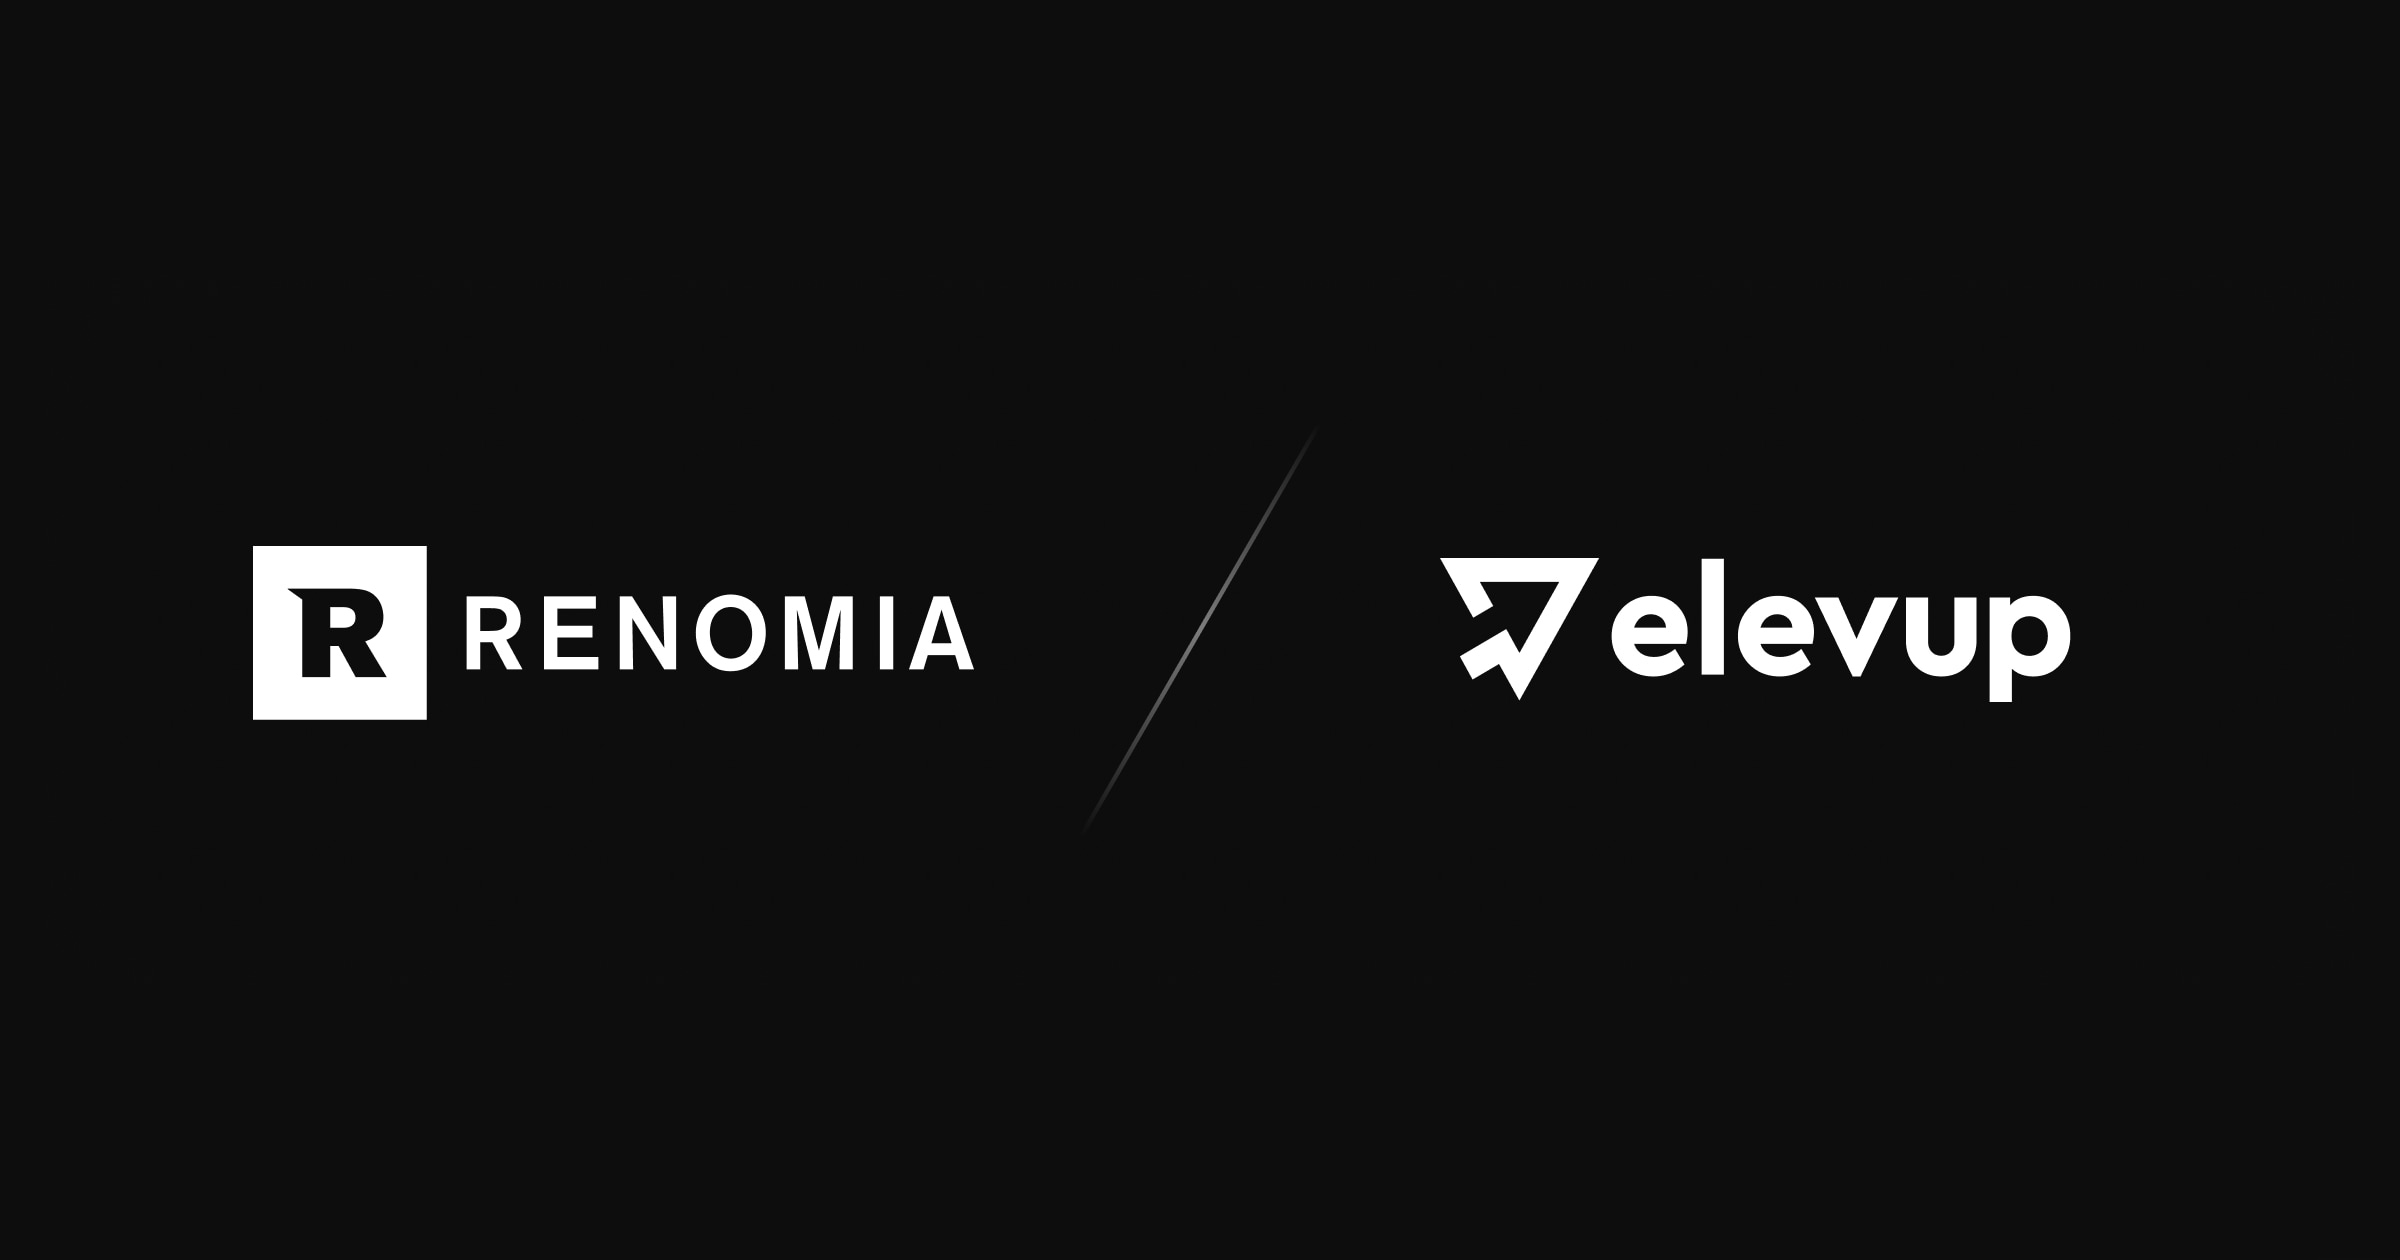 RENOMIA chooses elevup to design and develop their new mobile application HELP+ASSIST